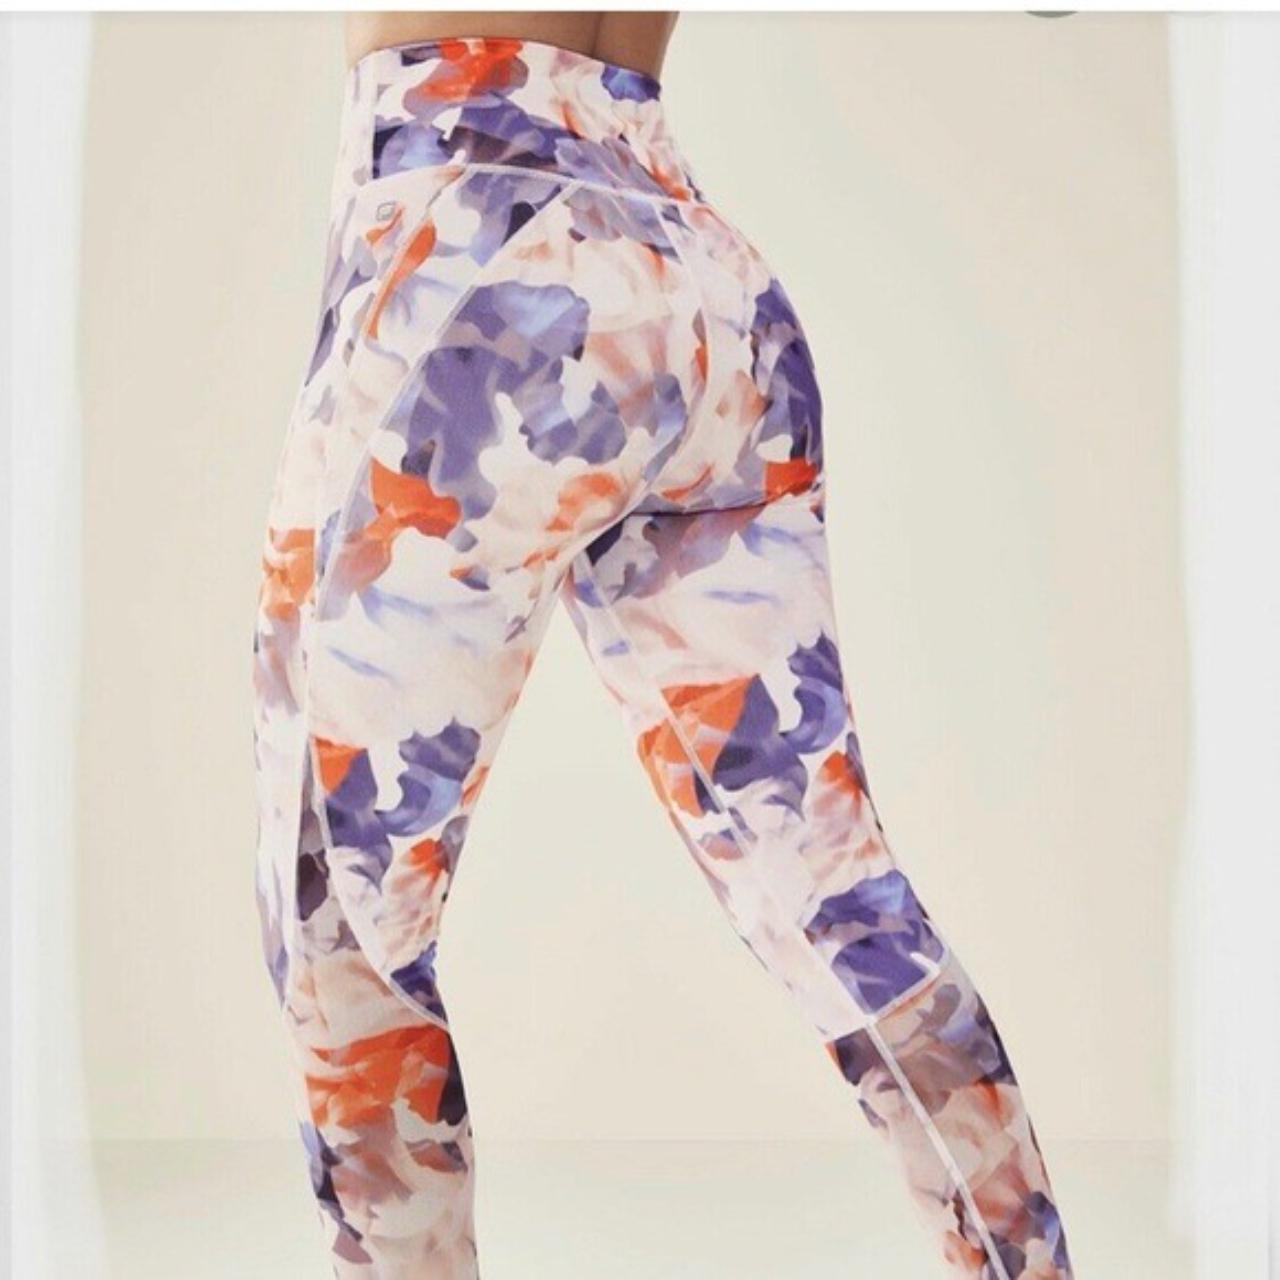 Product Image 1 - Pre-owned fabletics workout pants. These